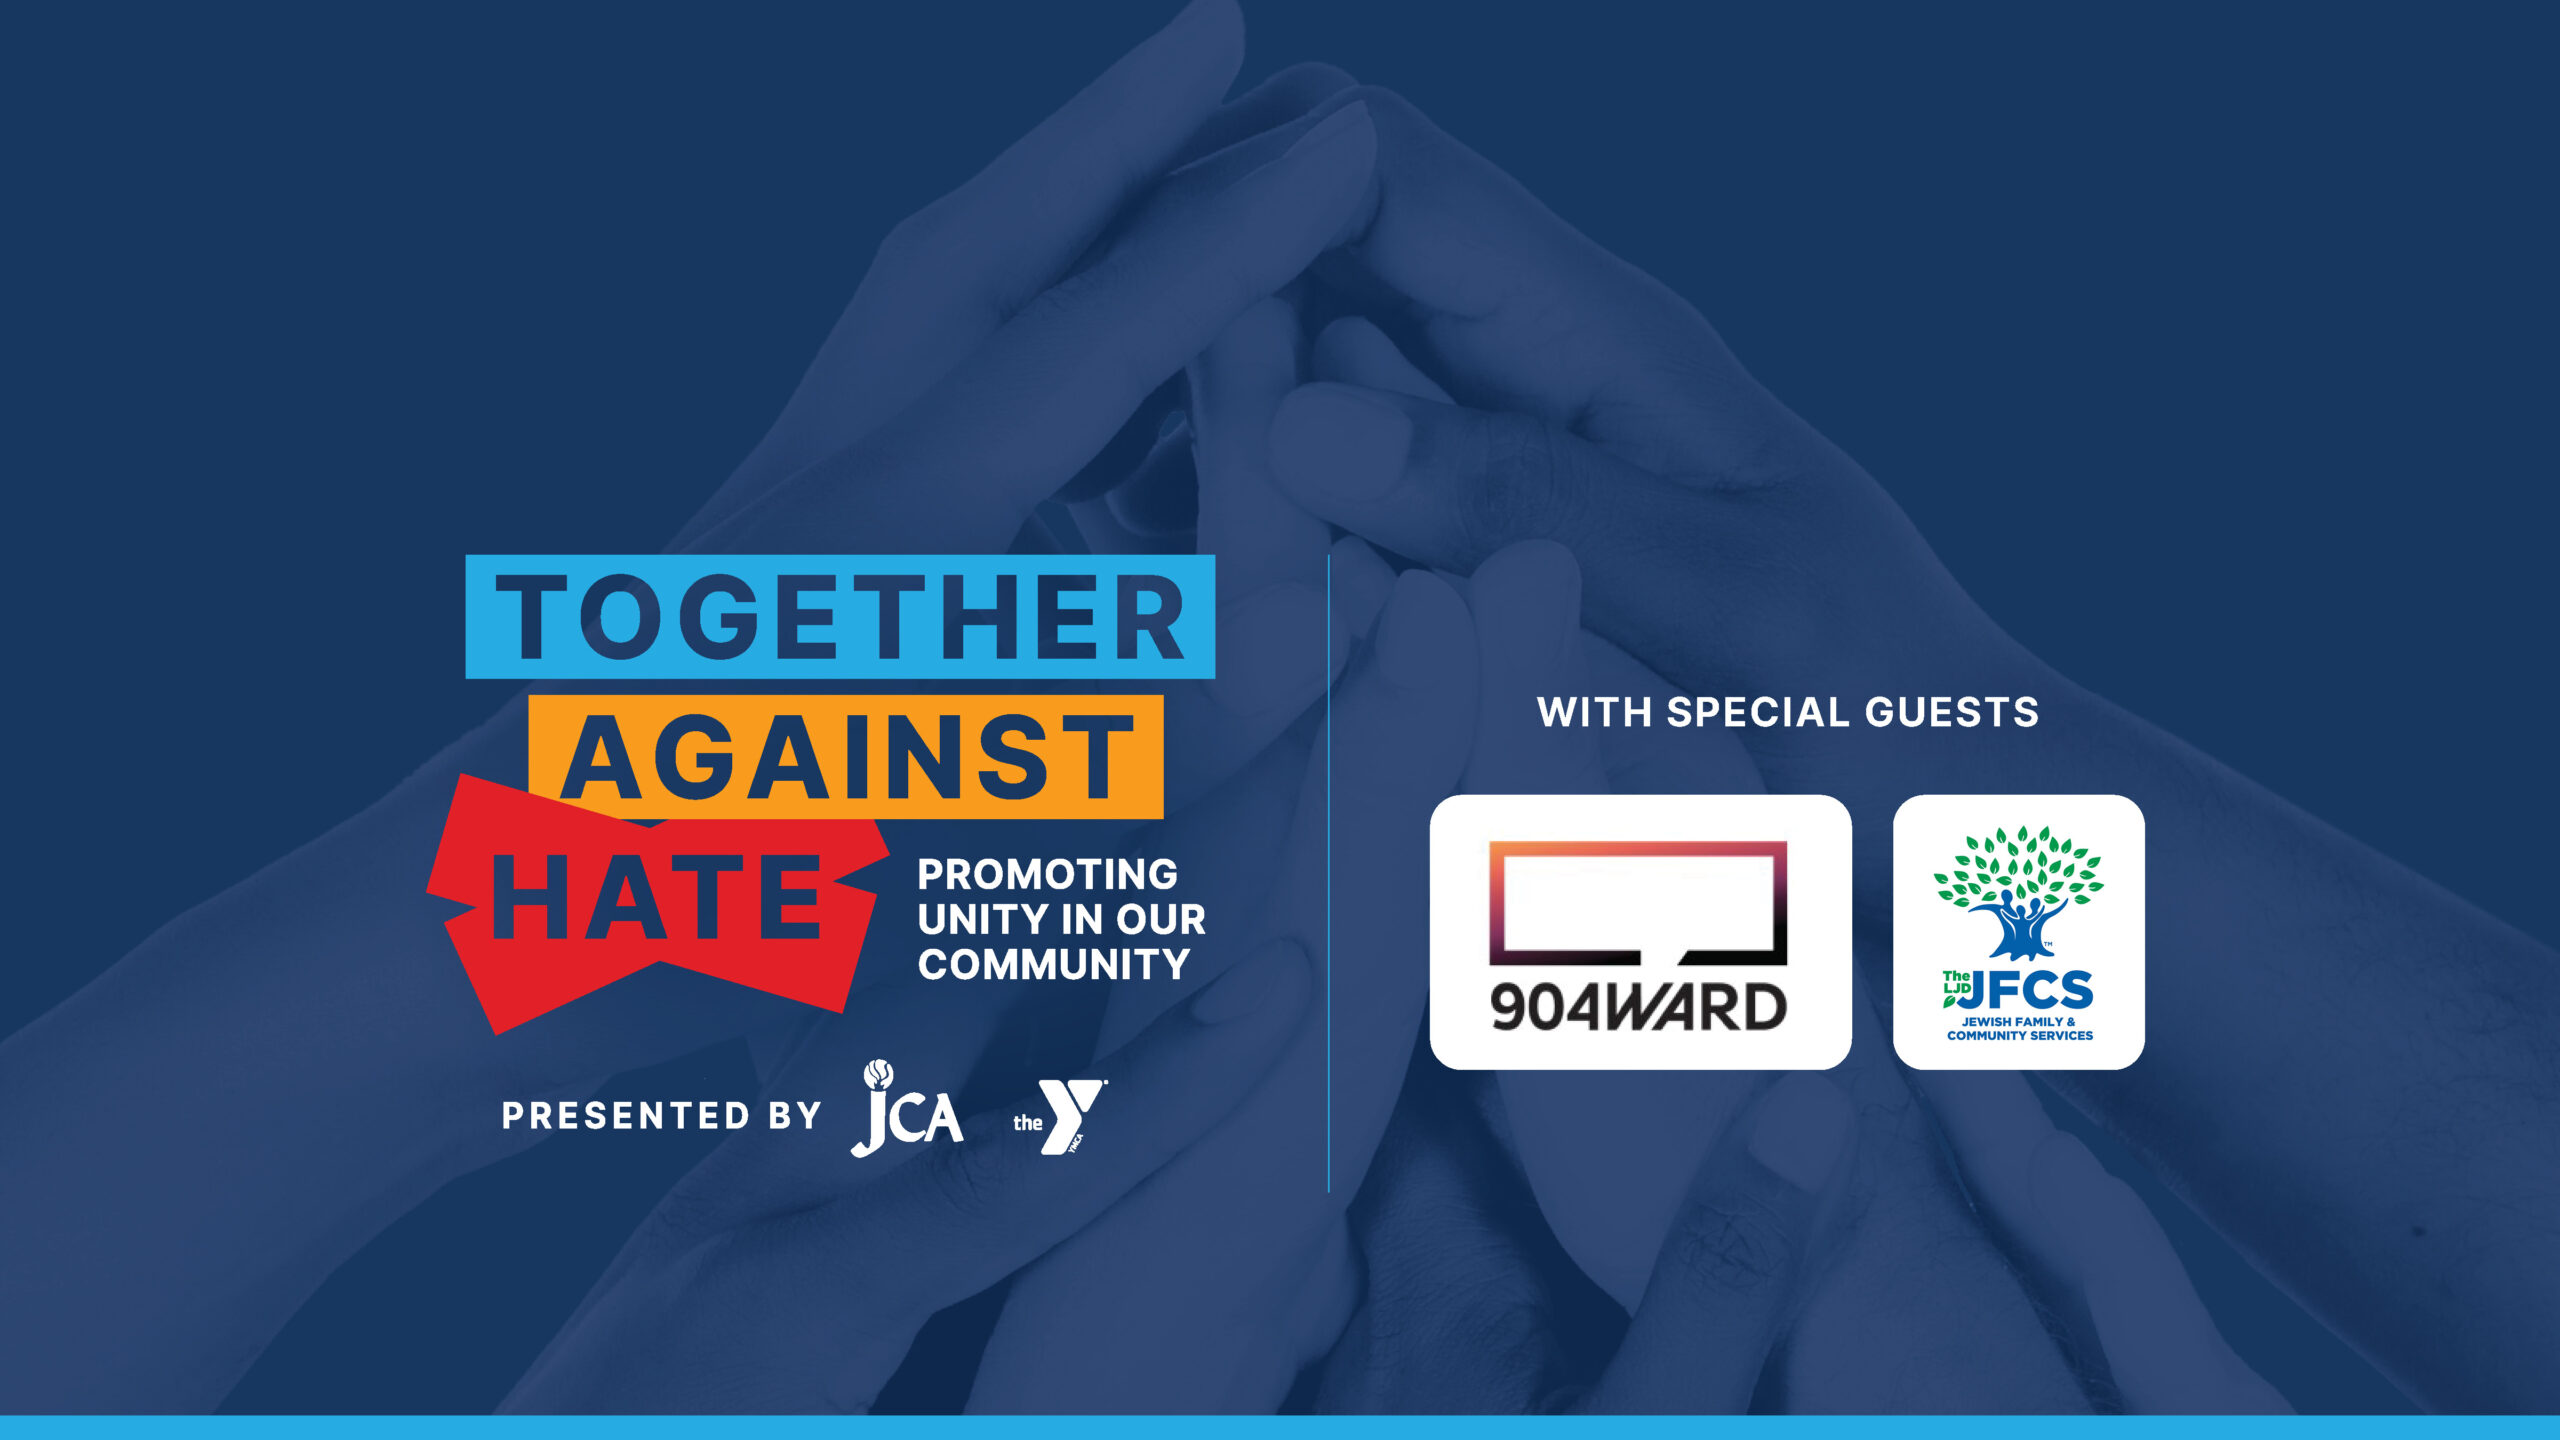 Together Against Hate: Special Guests 904Ward and The LJD Jewish Family & Community Services